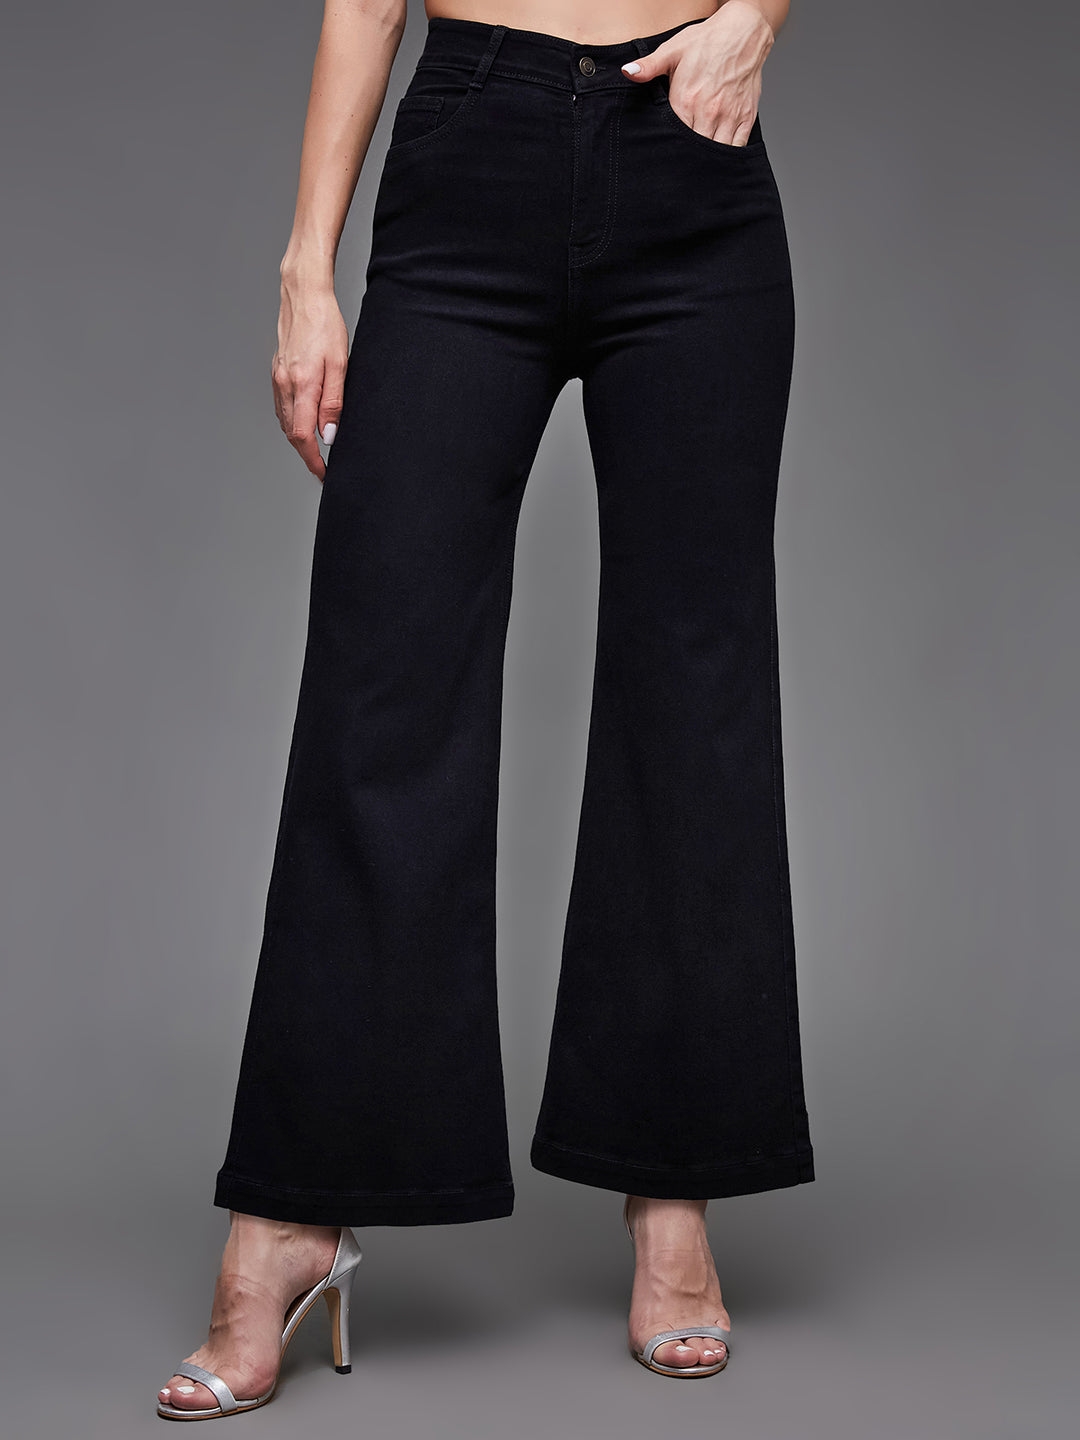 MISS CHASE | Black Wide Leg High Rise Clean Look Regular-Length Stretchable Denim Jeans